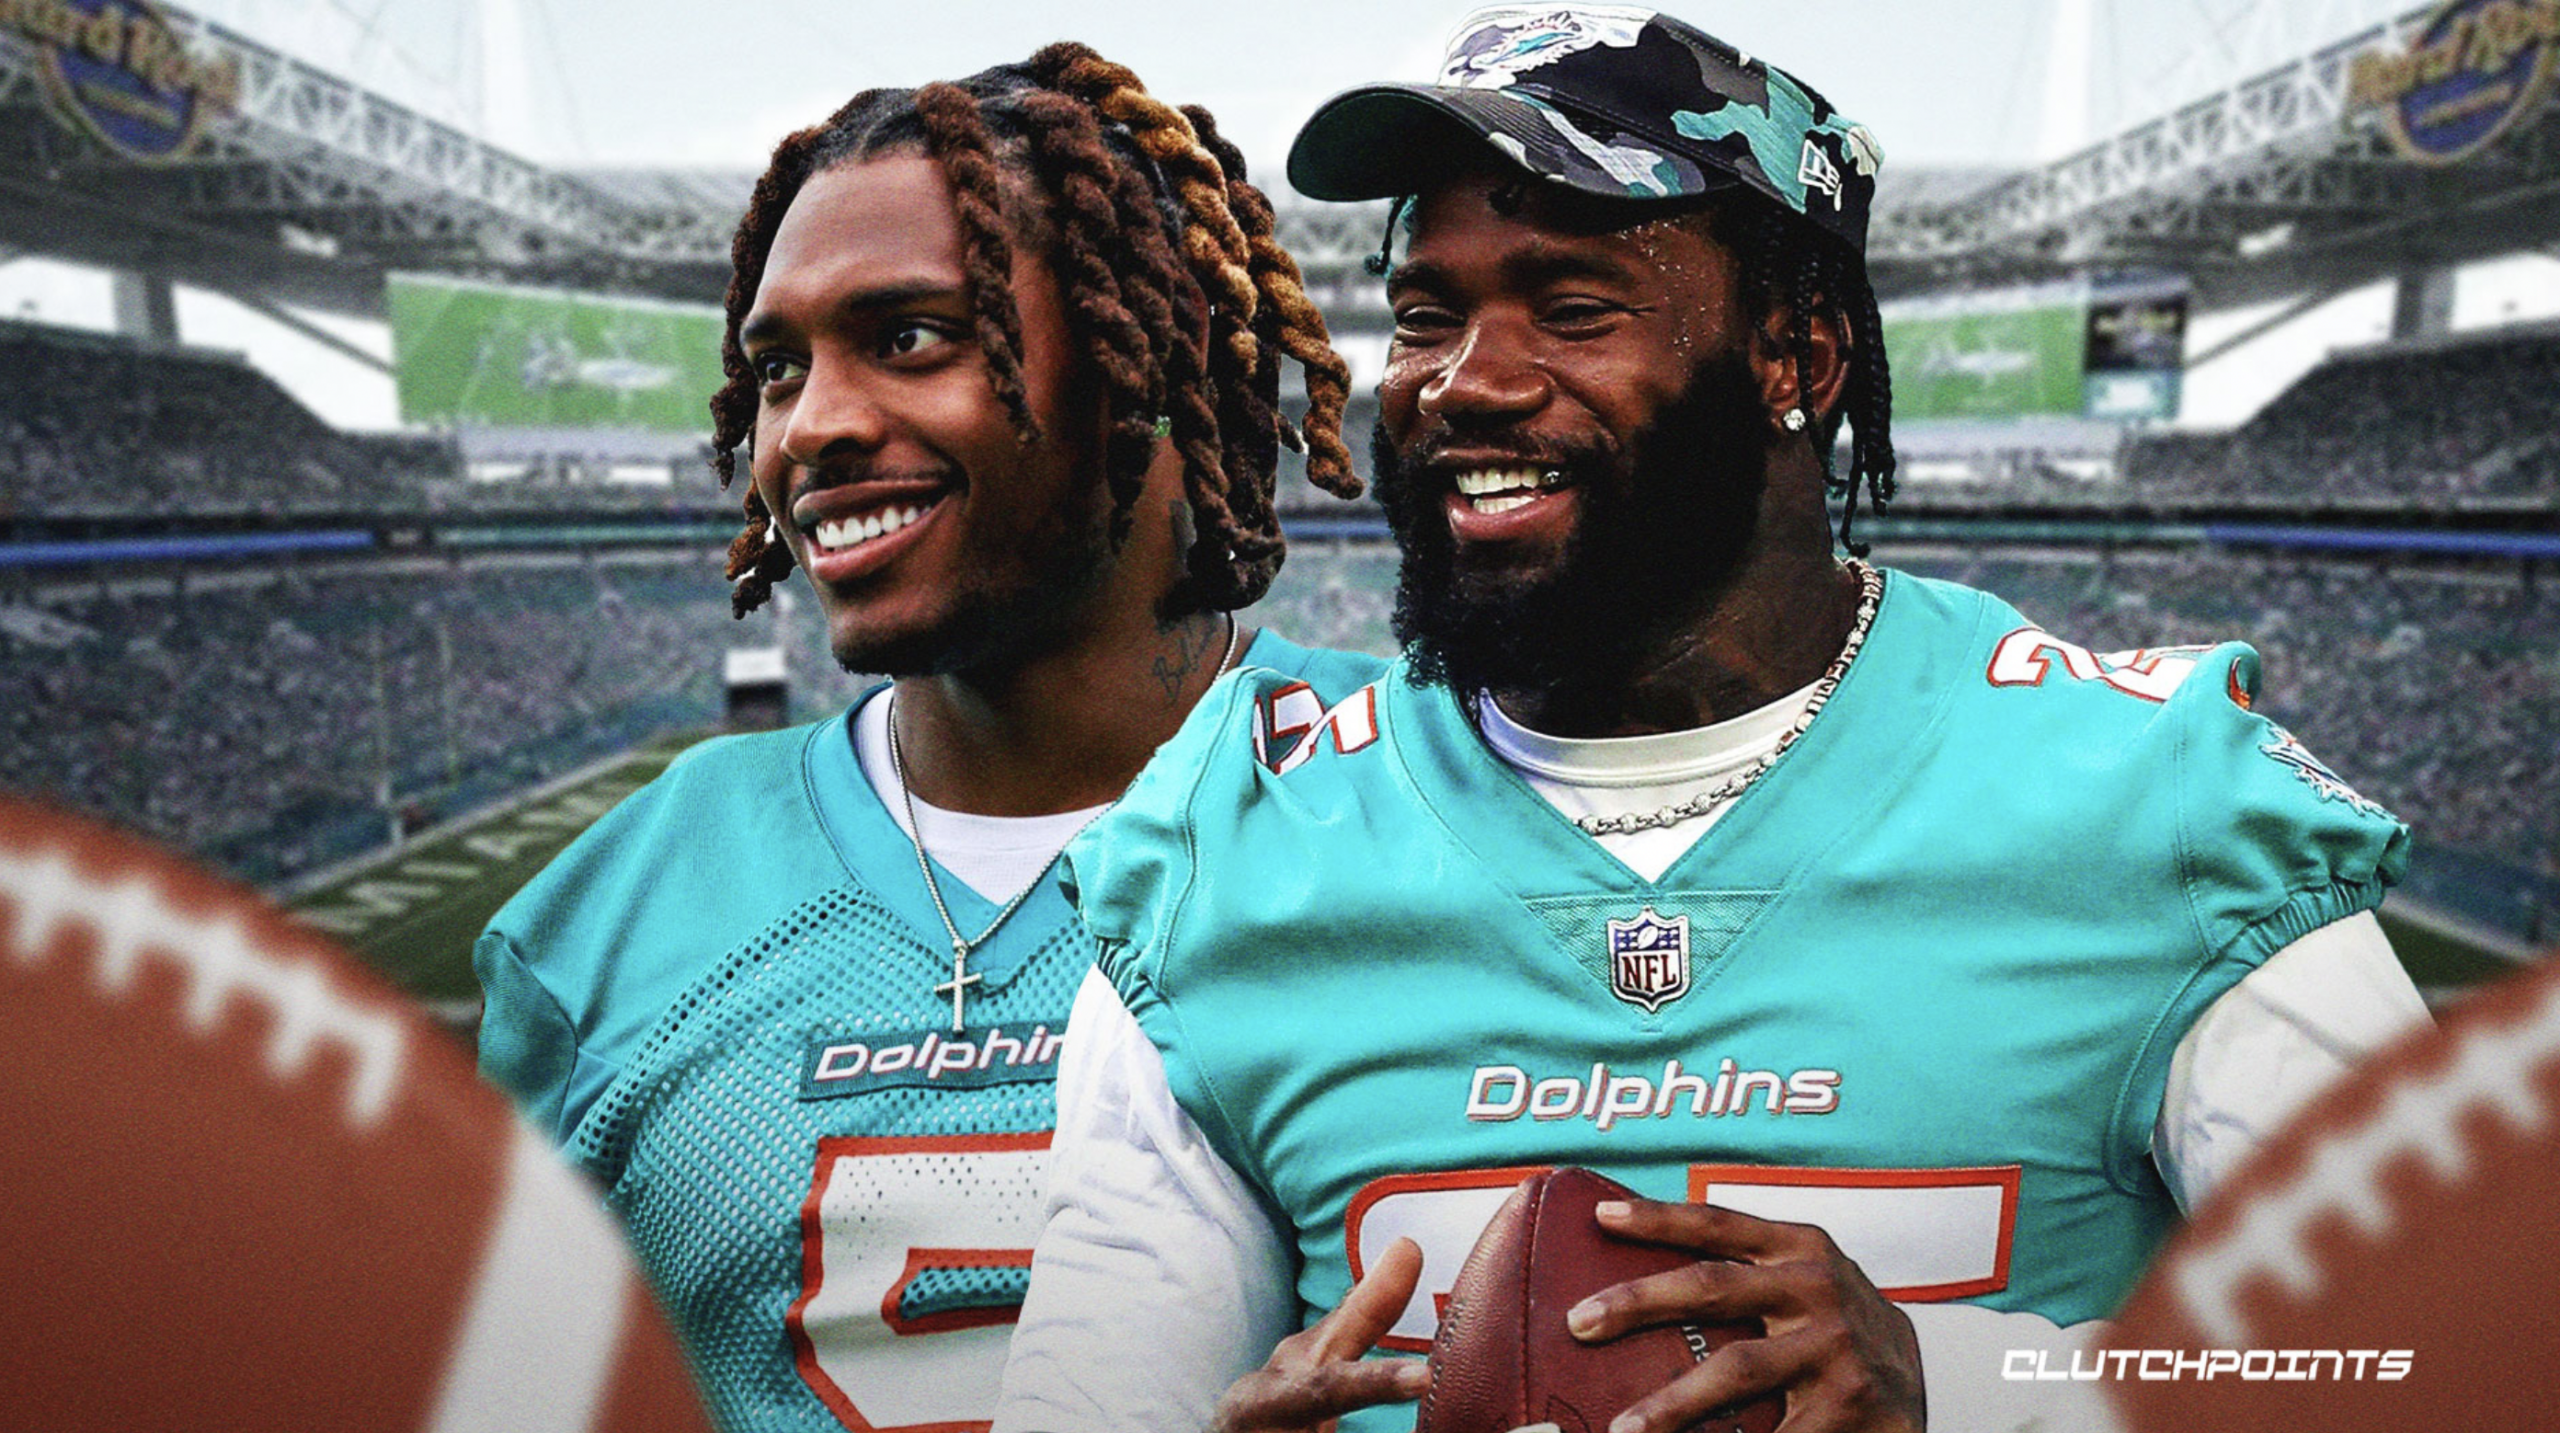 Dolphins' Jalen Ramsey says he and Xavien Howard 'can do special things'